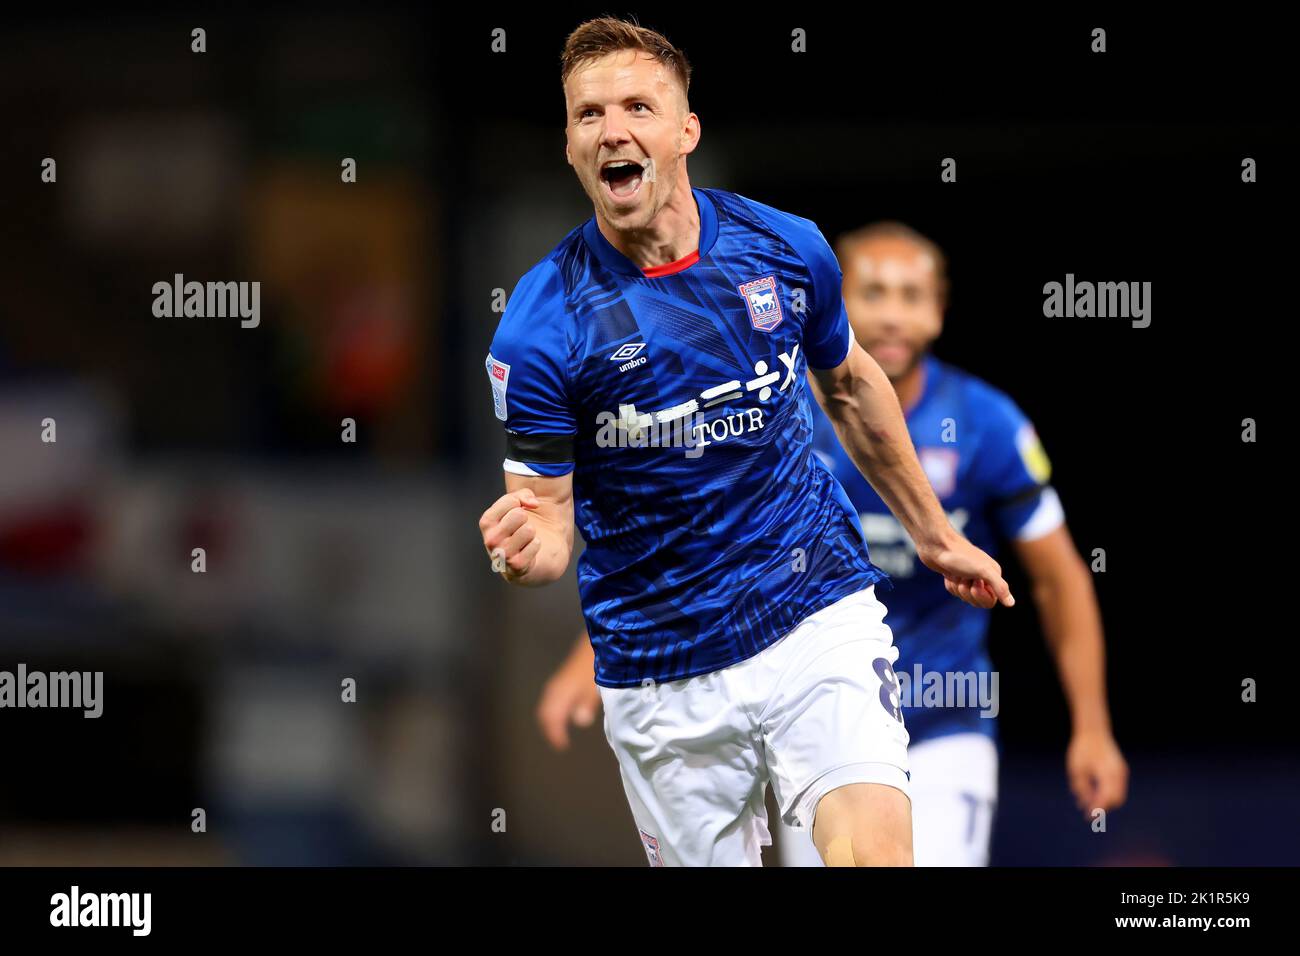 Lee Evans of Ipswich Town celebrates after he scores for 2-0 - Ipswich Town v Bristol Rovers, Sky Bet League One, Portman Road, Ipswich, UK - 13th September 2022  Editorial Use Only - DataCo restrictions apply Stock Photo